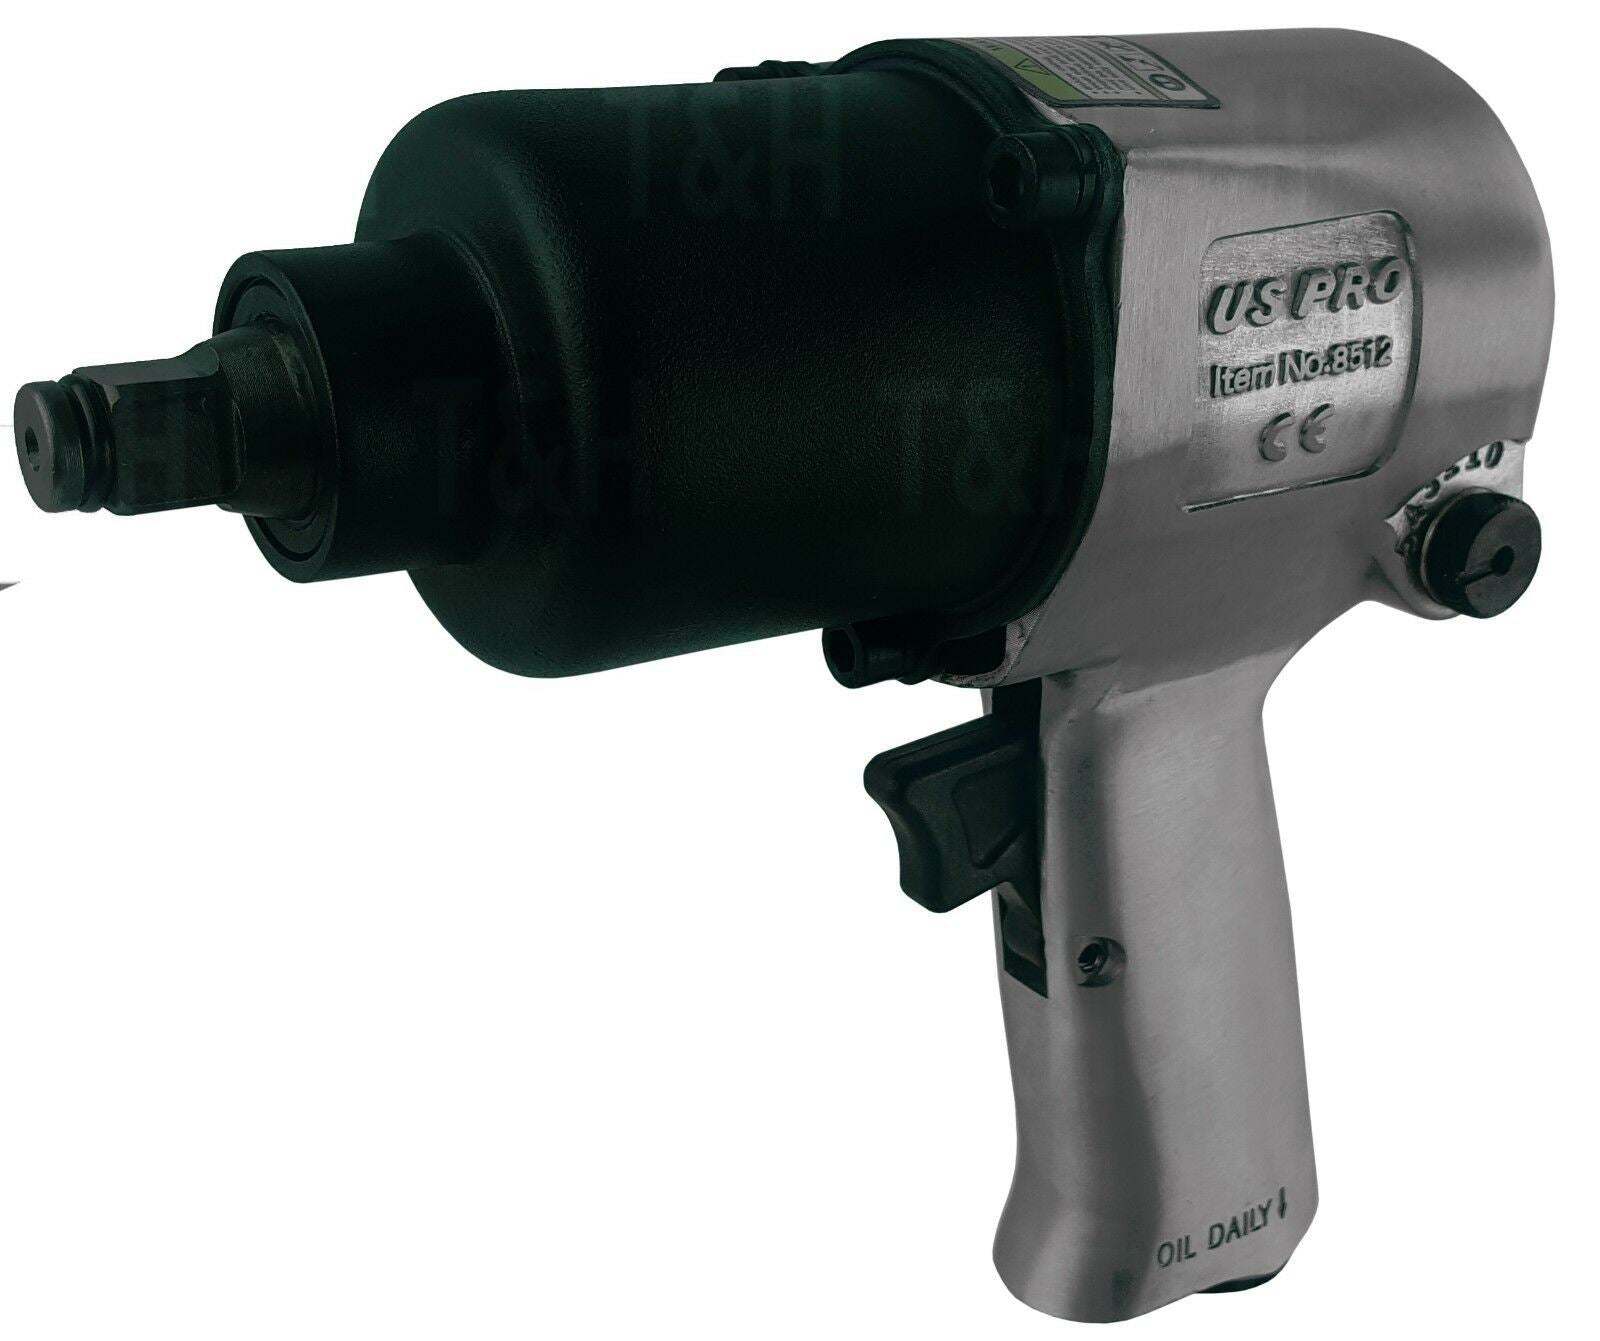 US PRO 1/2" DRIVE AIR IMPACT WRENCH 660Nm